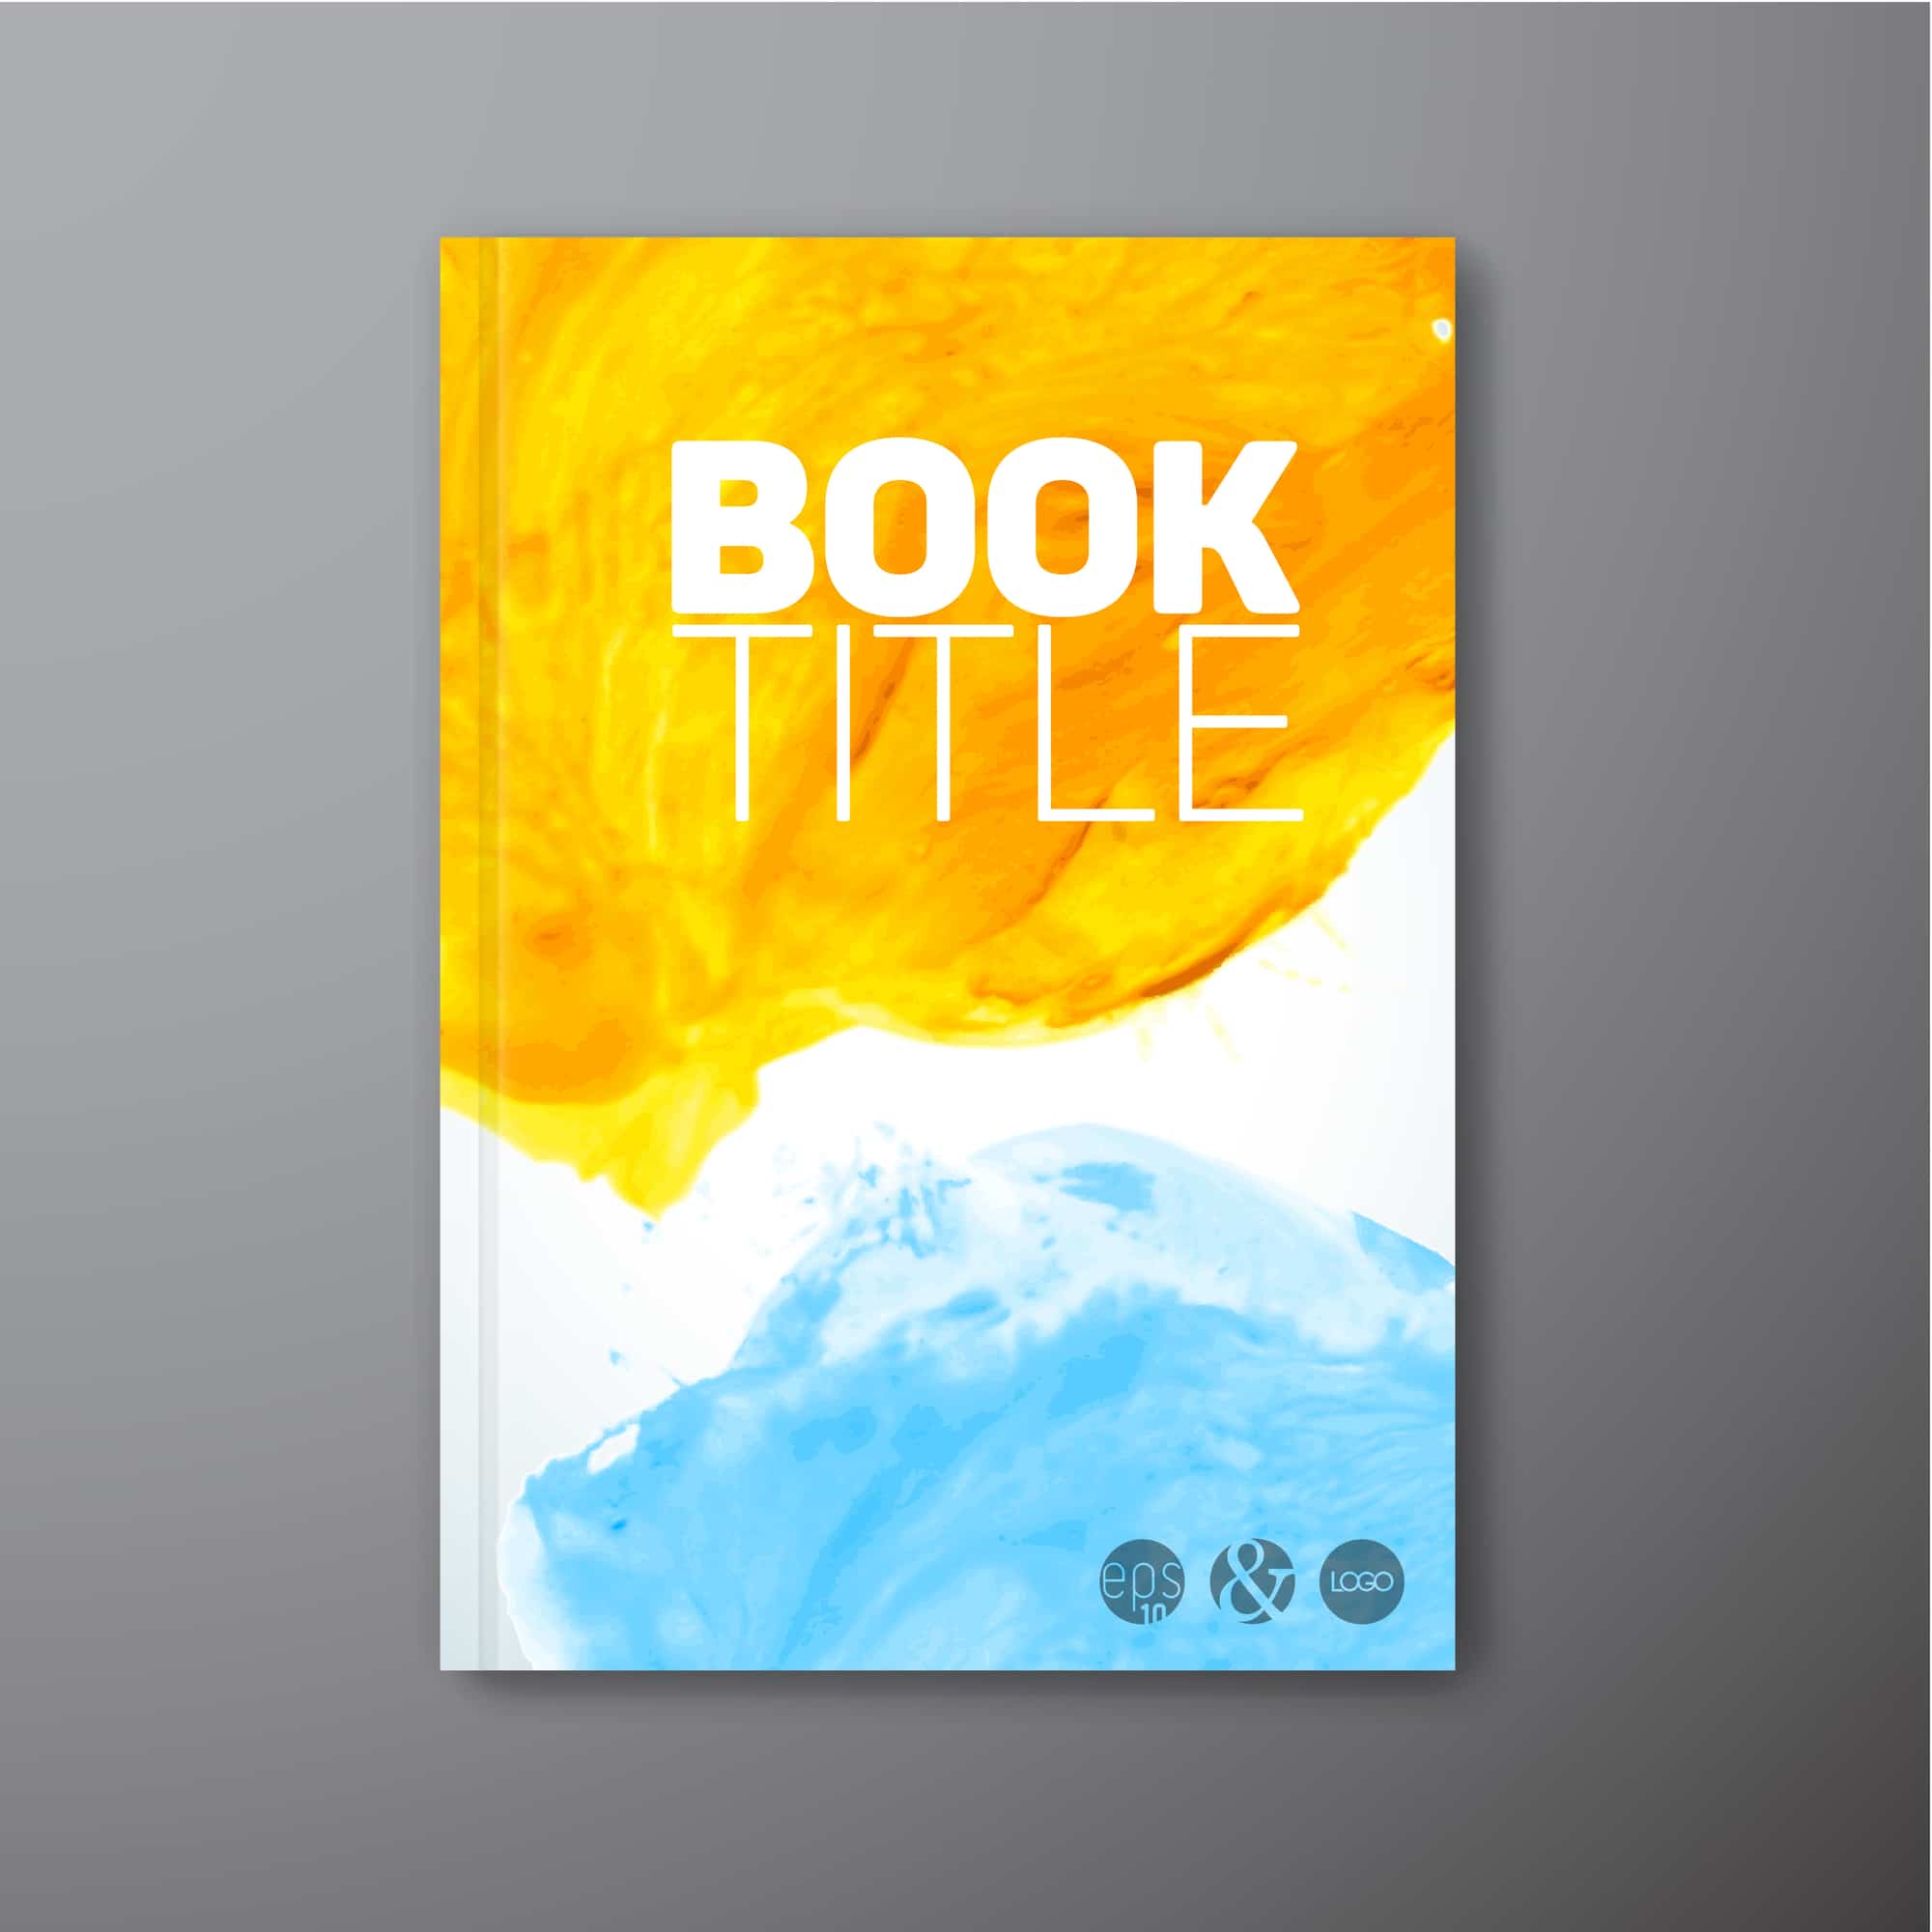 Modern artistic Vector abstract book watercolor cover template - yellow and blue version